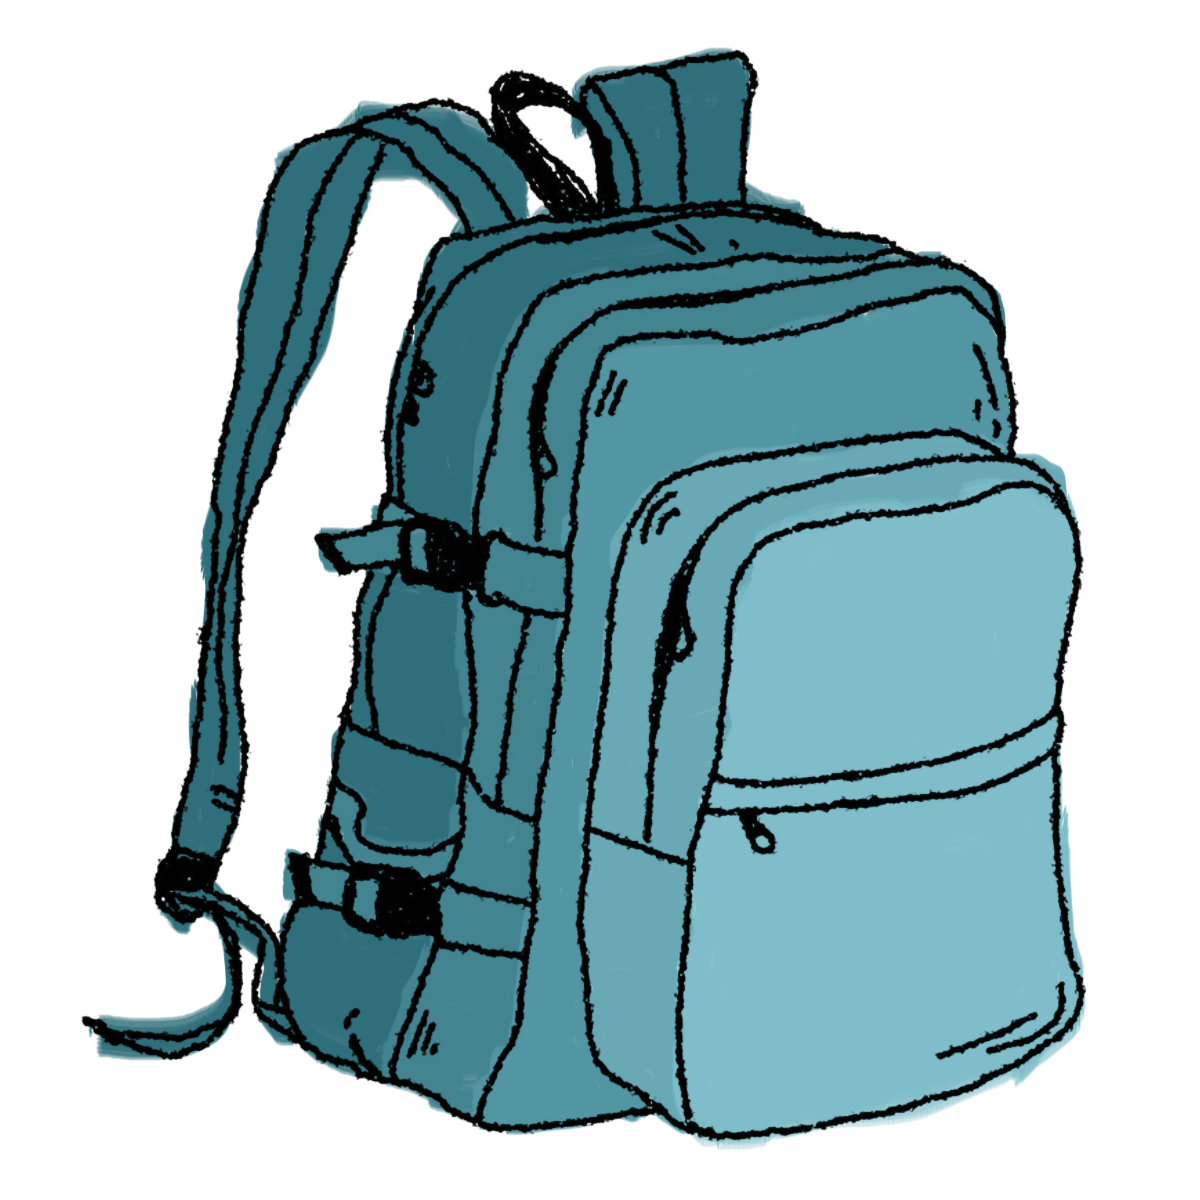 Hiking Backpack Clipart   Clipart Panda   Free Clipart Images